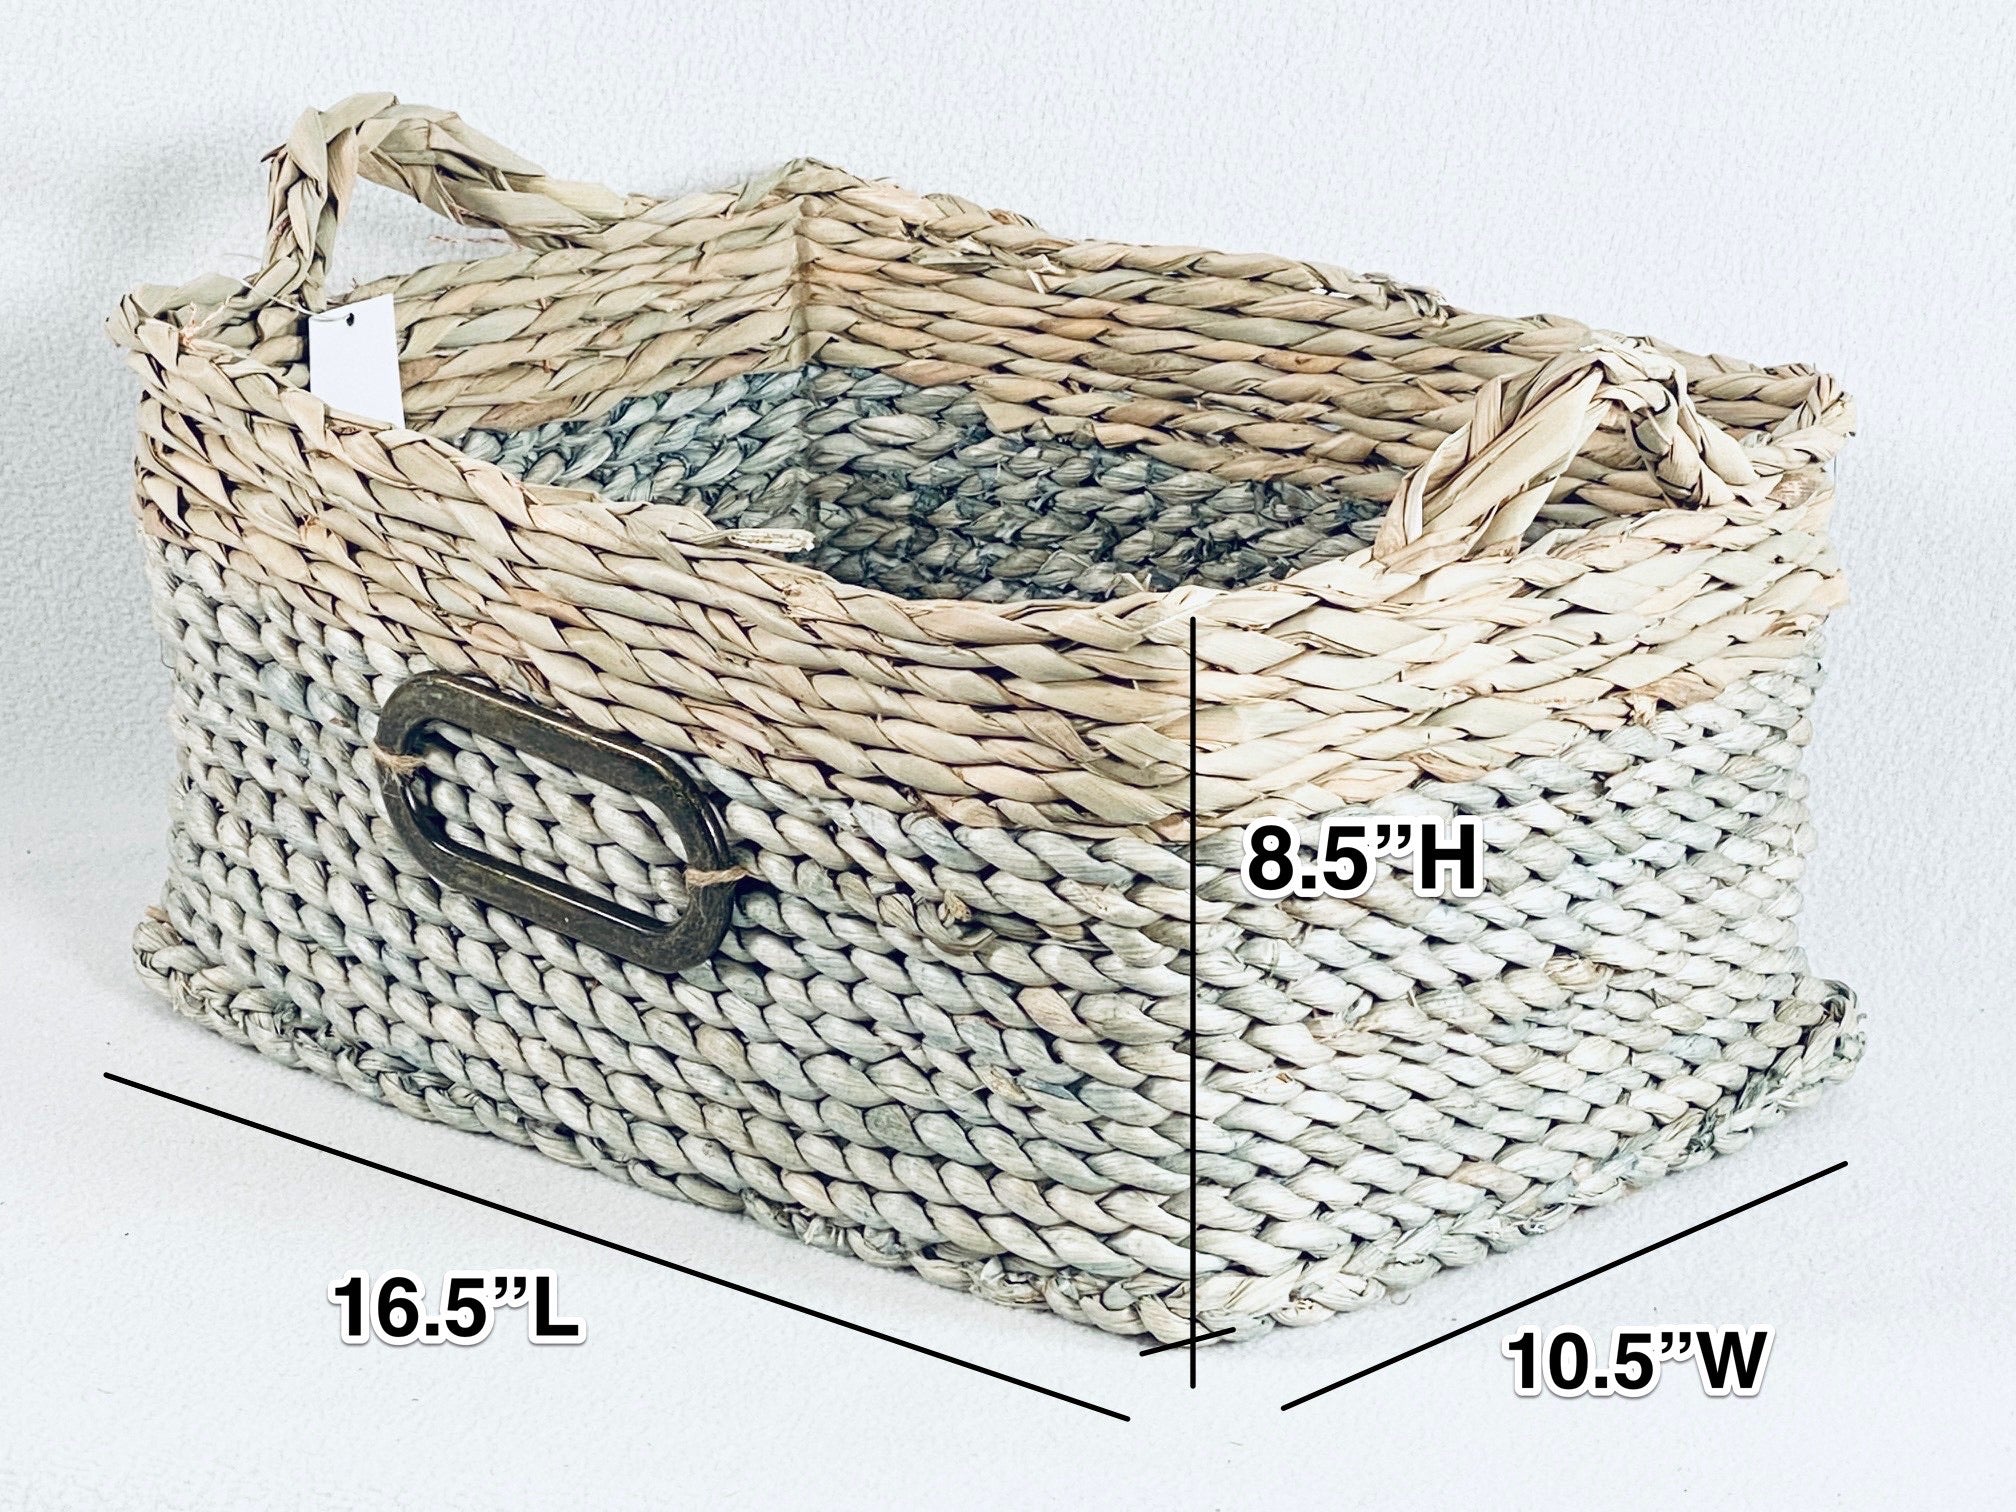 Straw Basket Set product image features the larger of 3 baskets in the set .  Material: natural straw. Color: Dusty blue and natural. Size:16.5"L X 10.5"W X 8.5"H